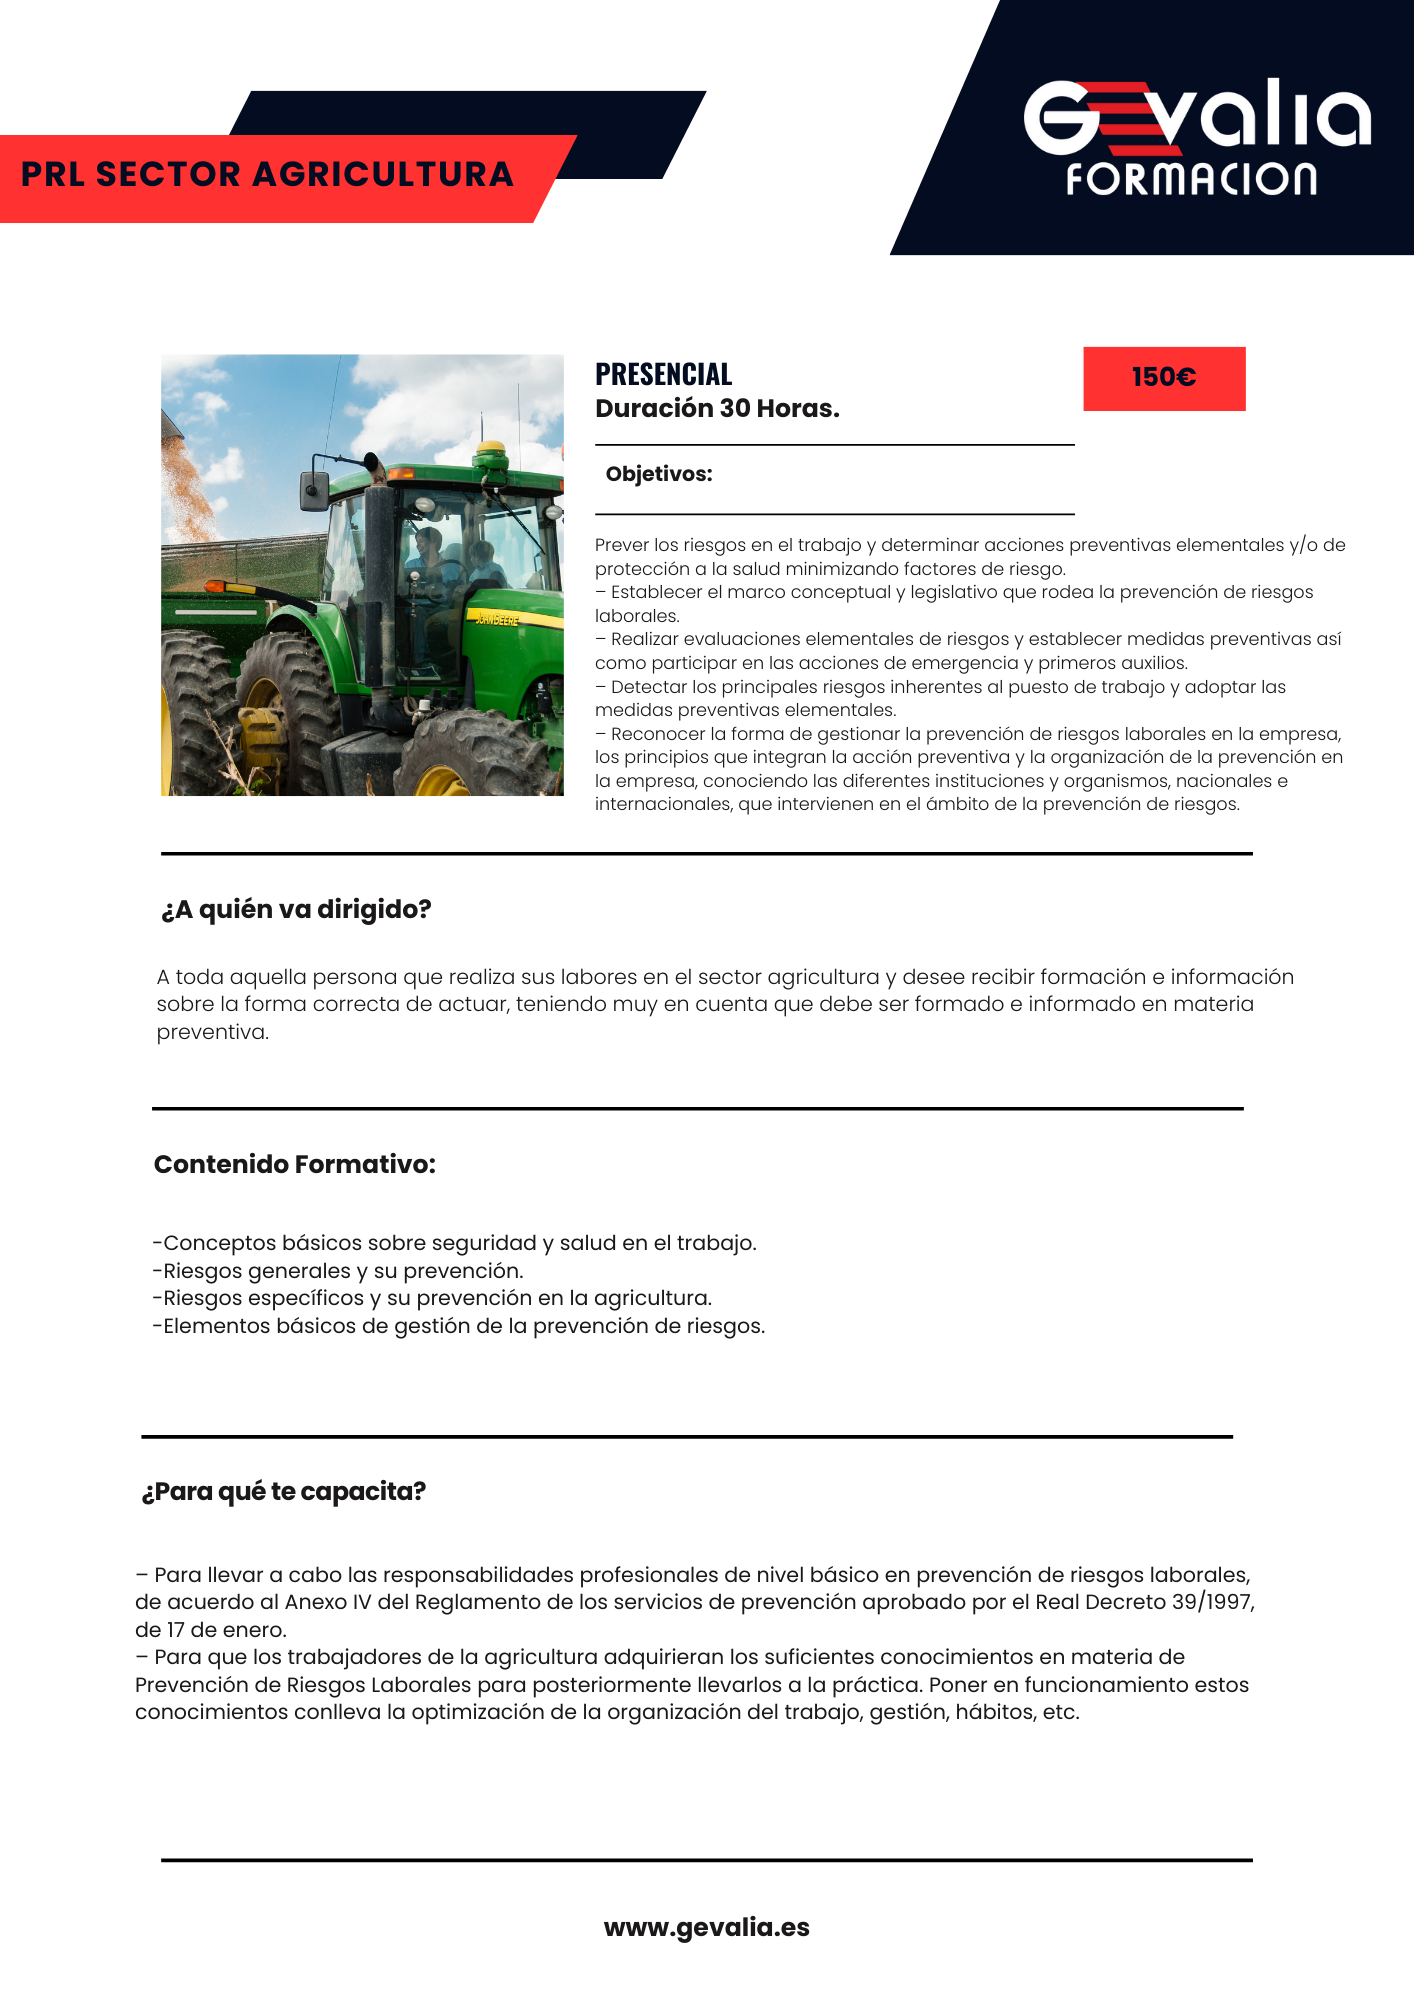 PRL SECTOR AGRICULTURA